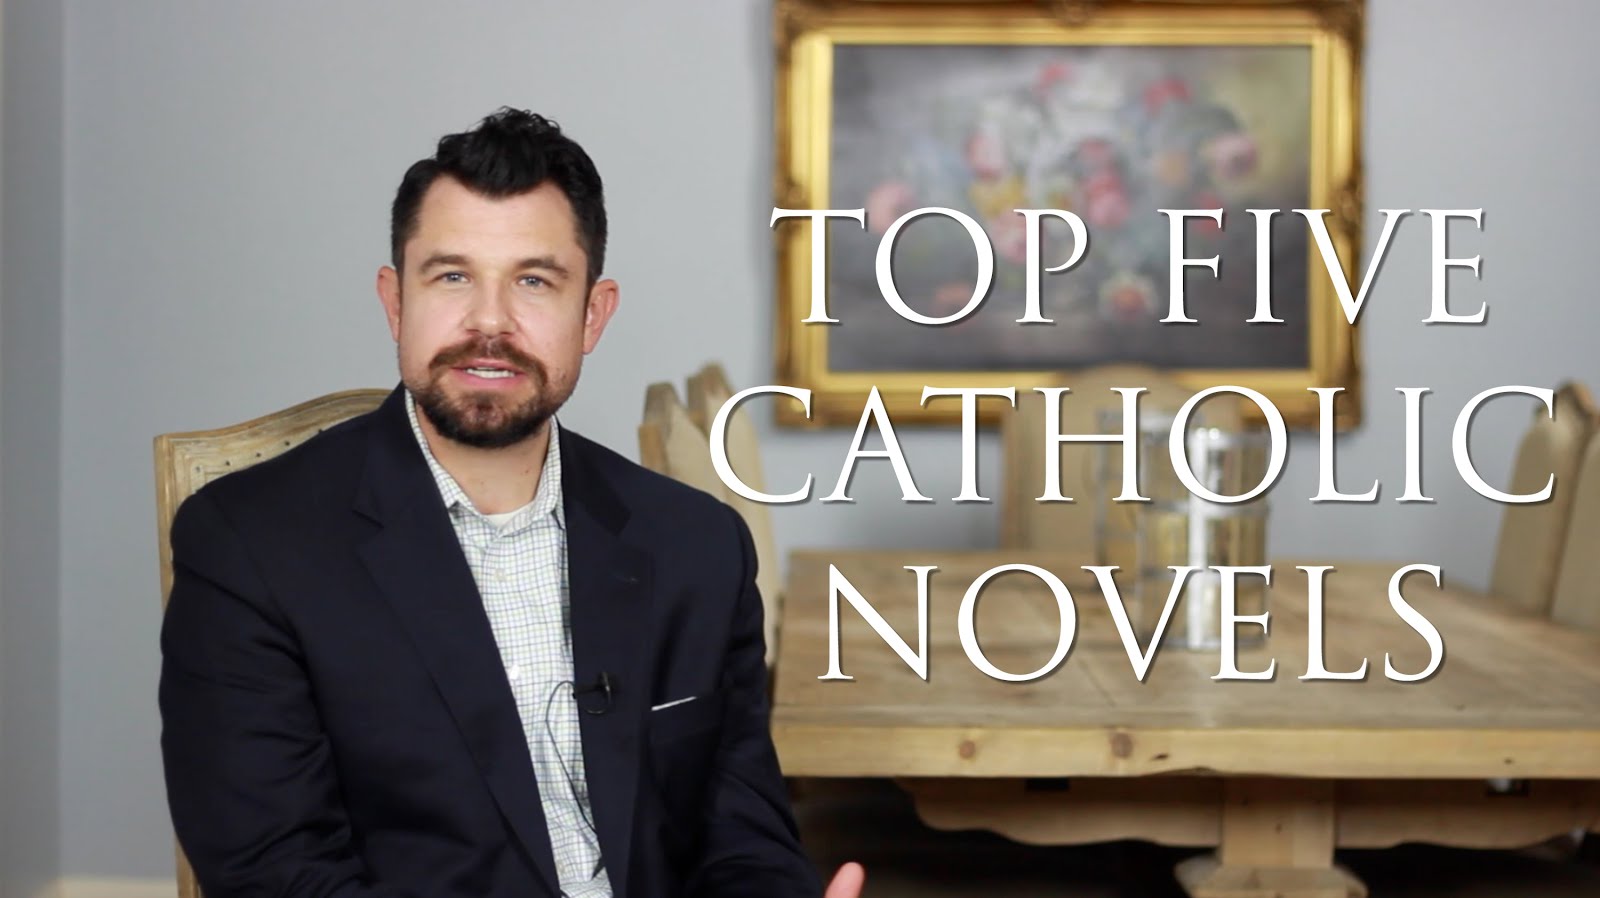 Top 5 Catholic Novels (other than the Lord of the Rings)